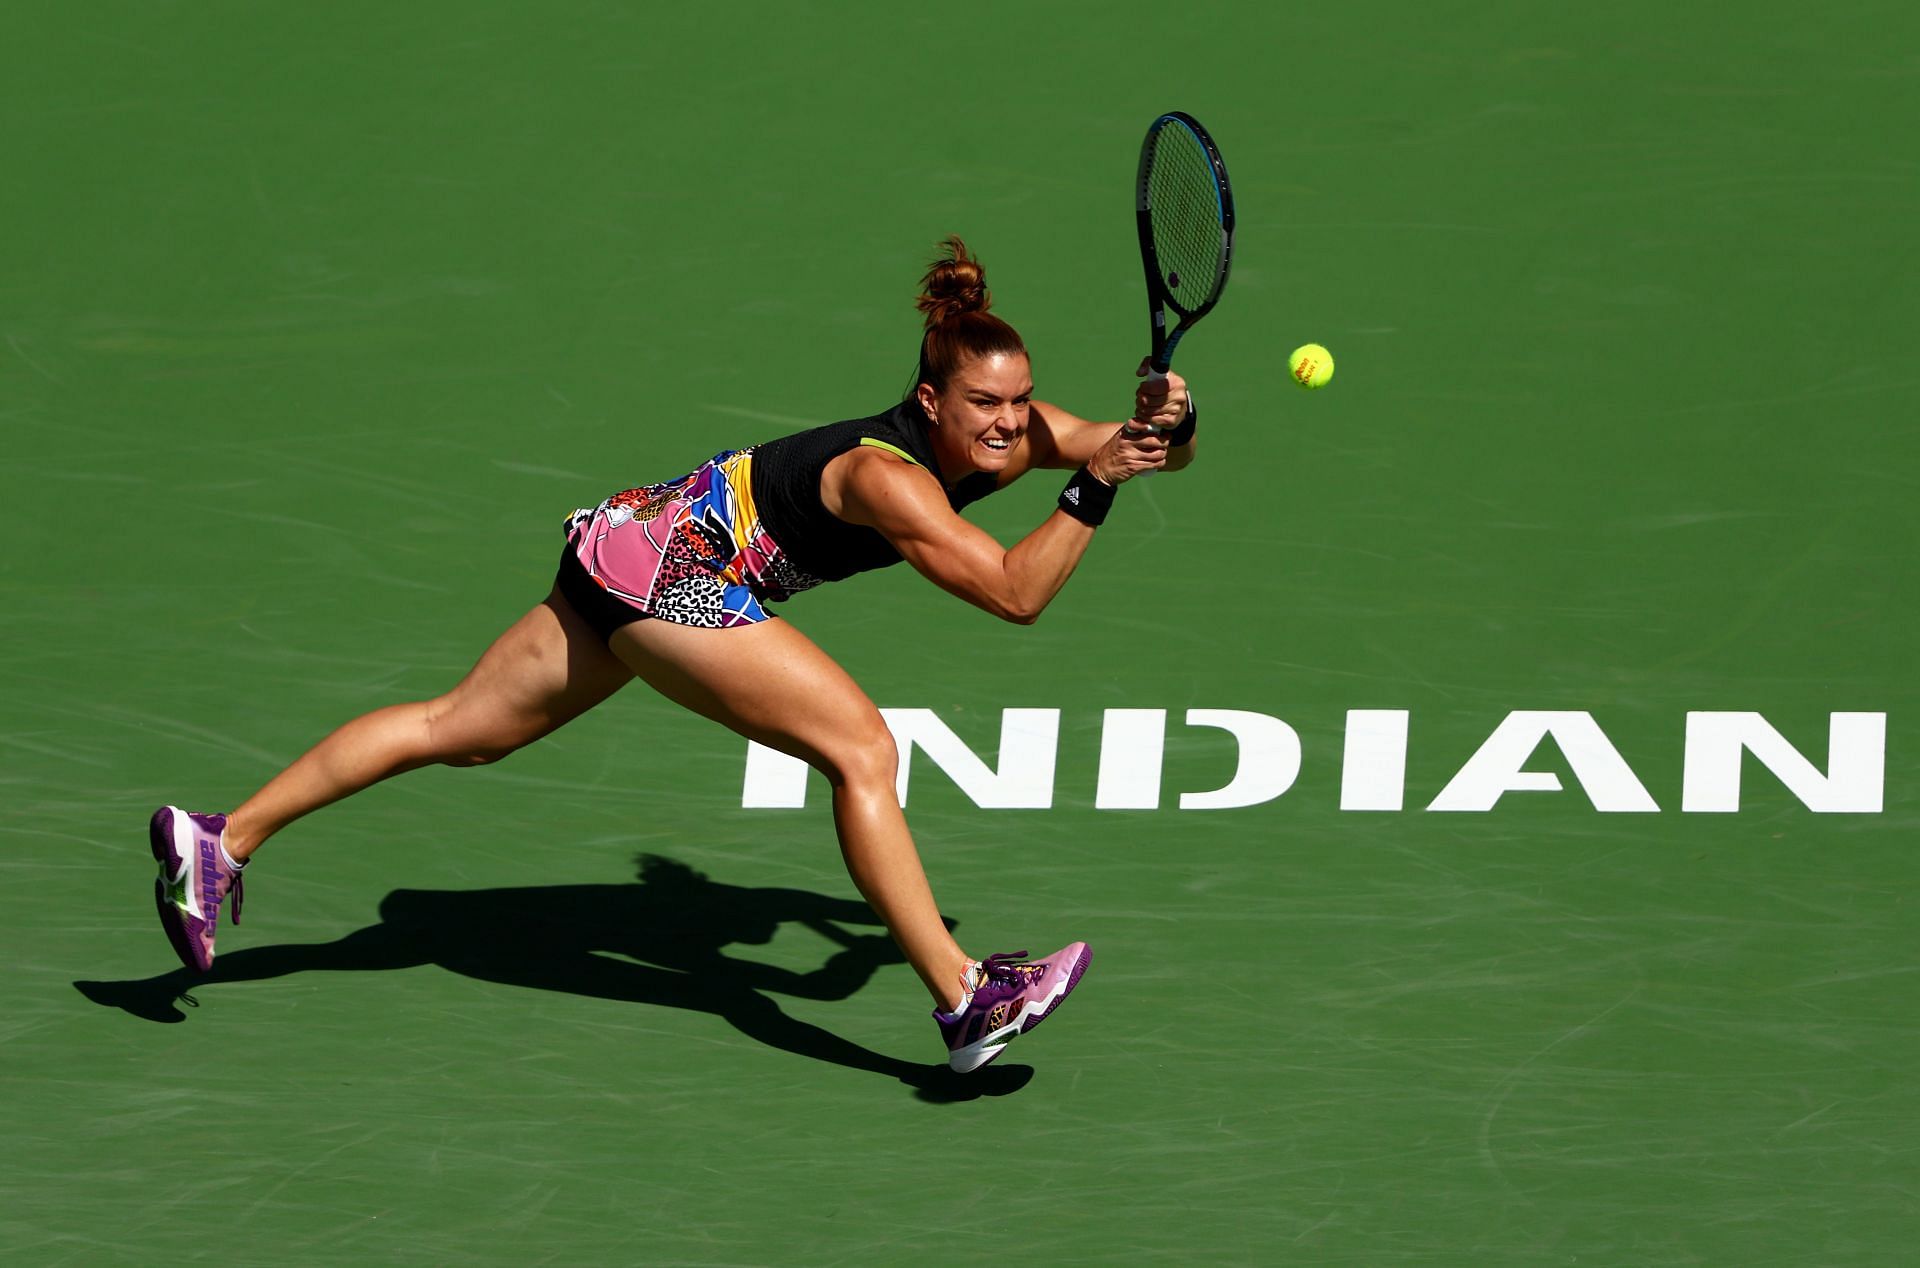 Maria Sakkari reached the semifinals of the Miami Open last year.